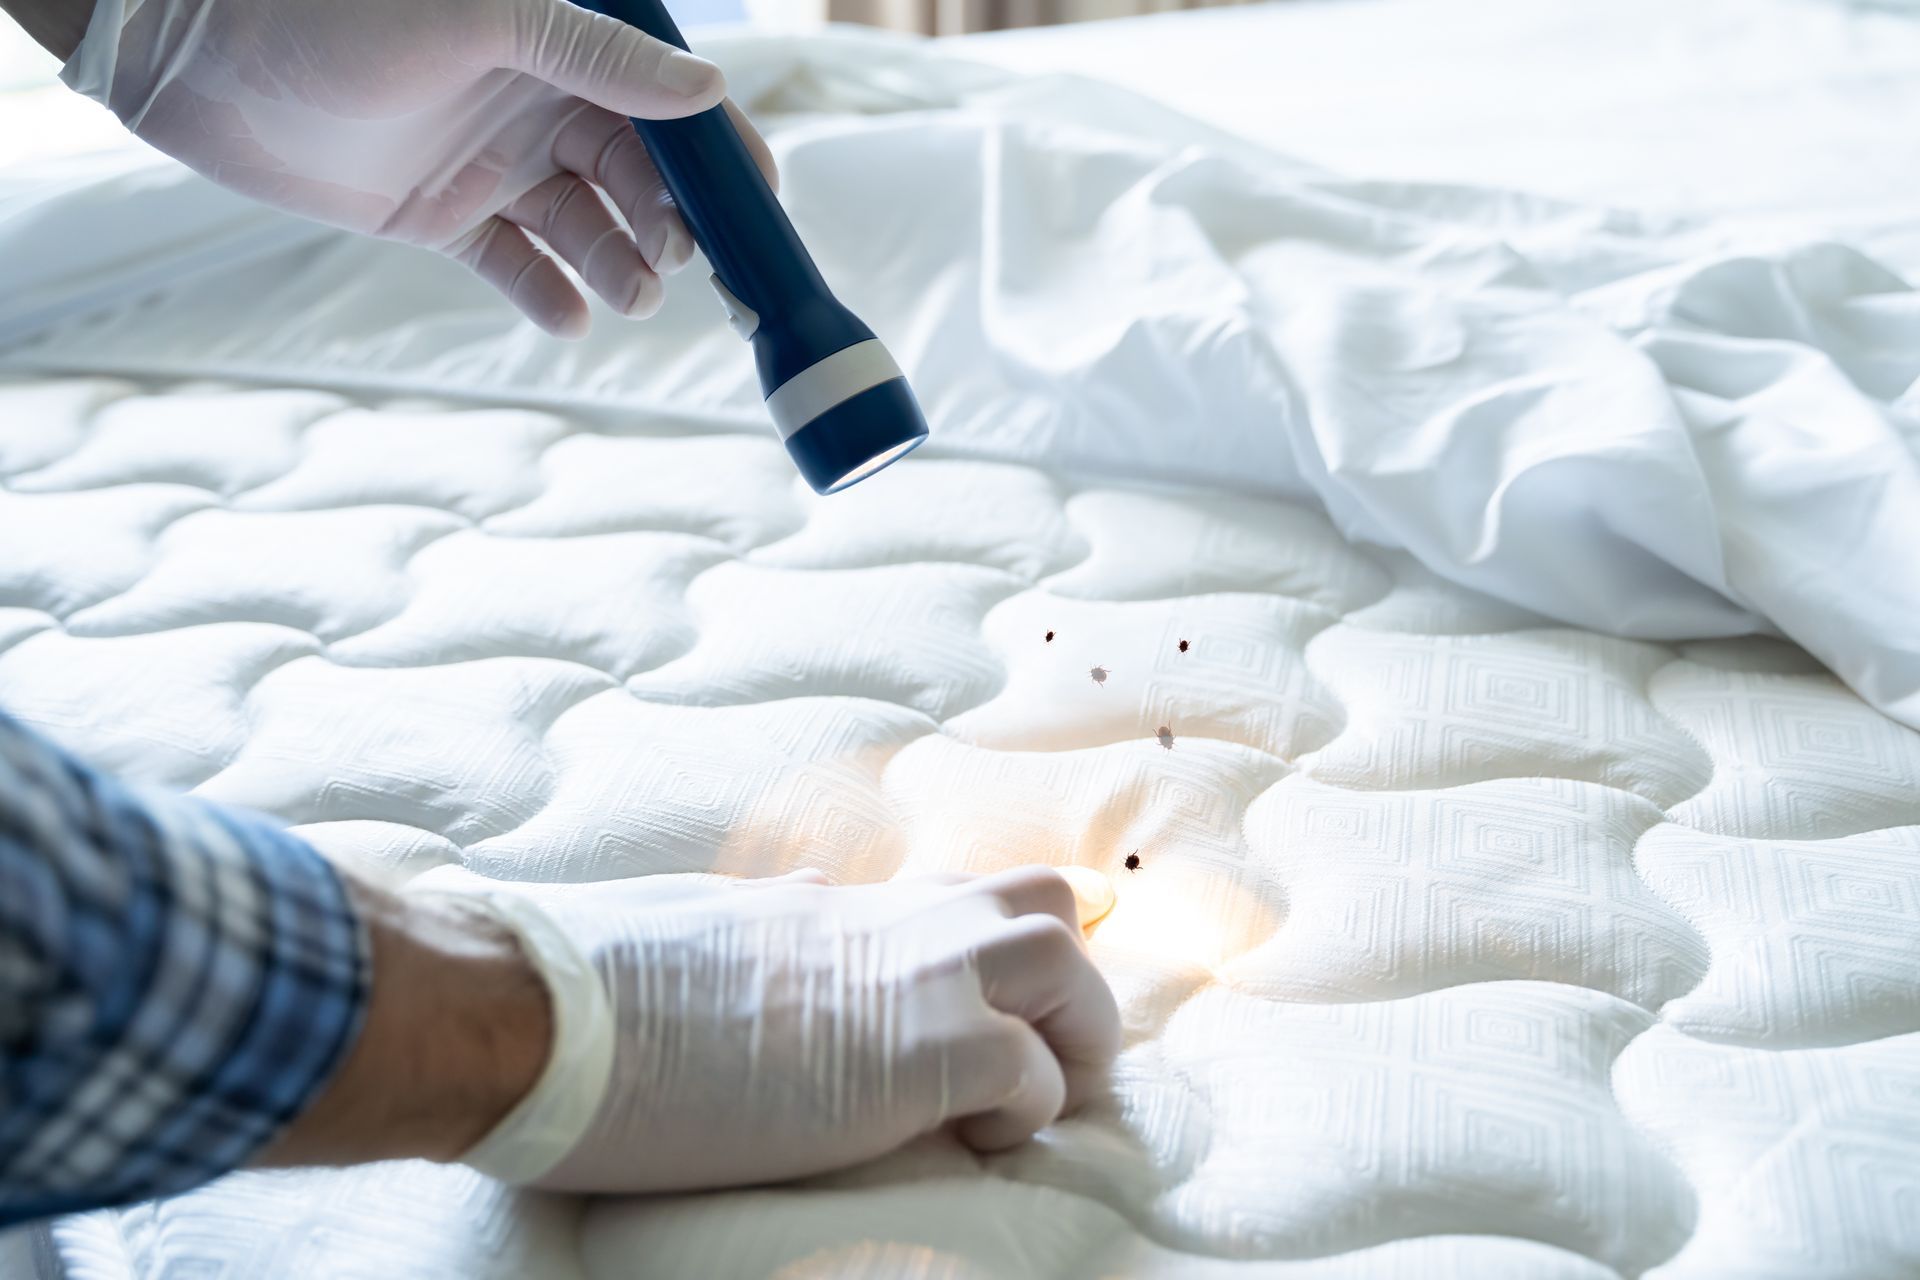 a person wearing gloves examines a mattress with a flashlight